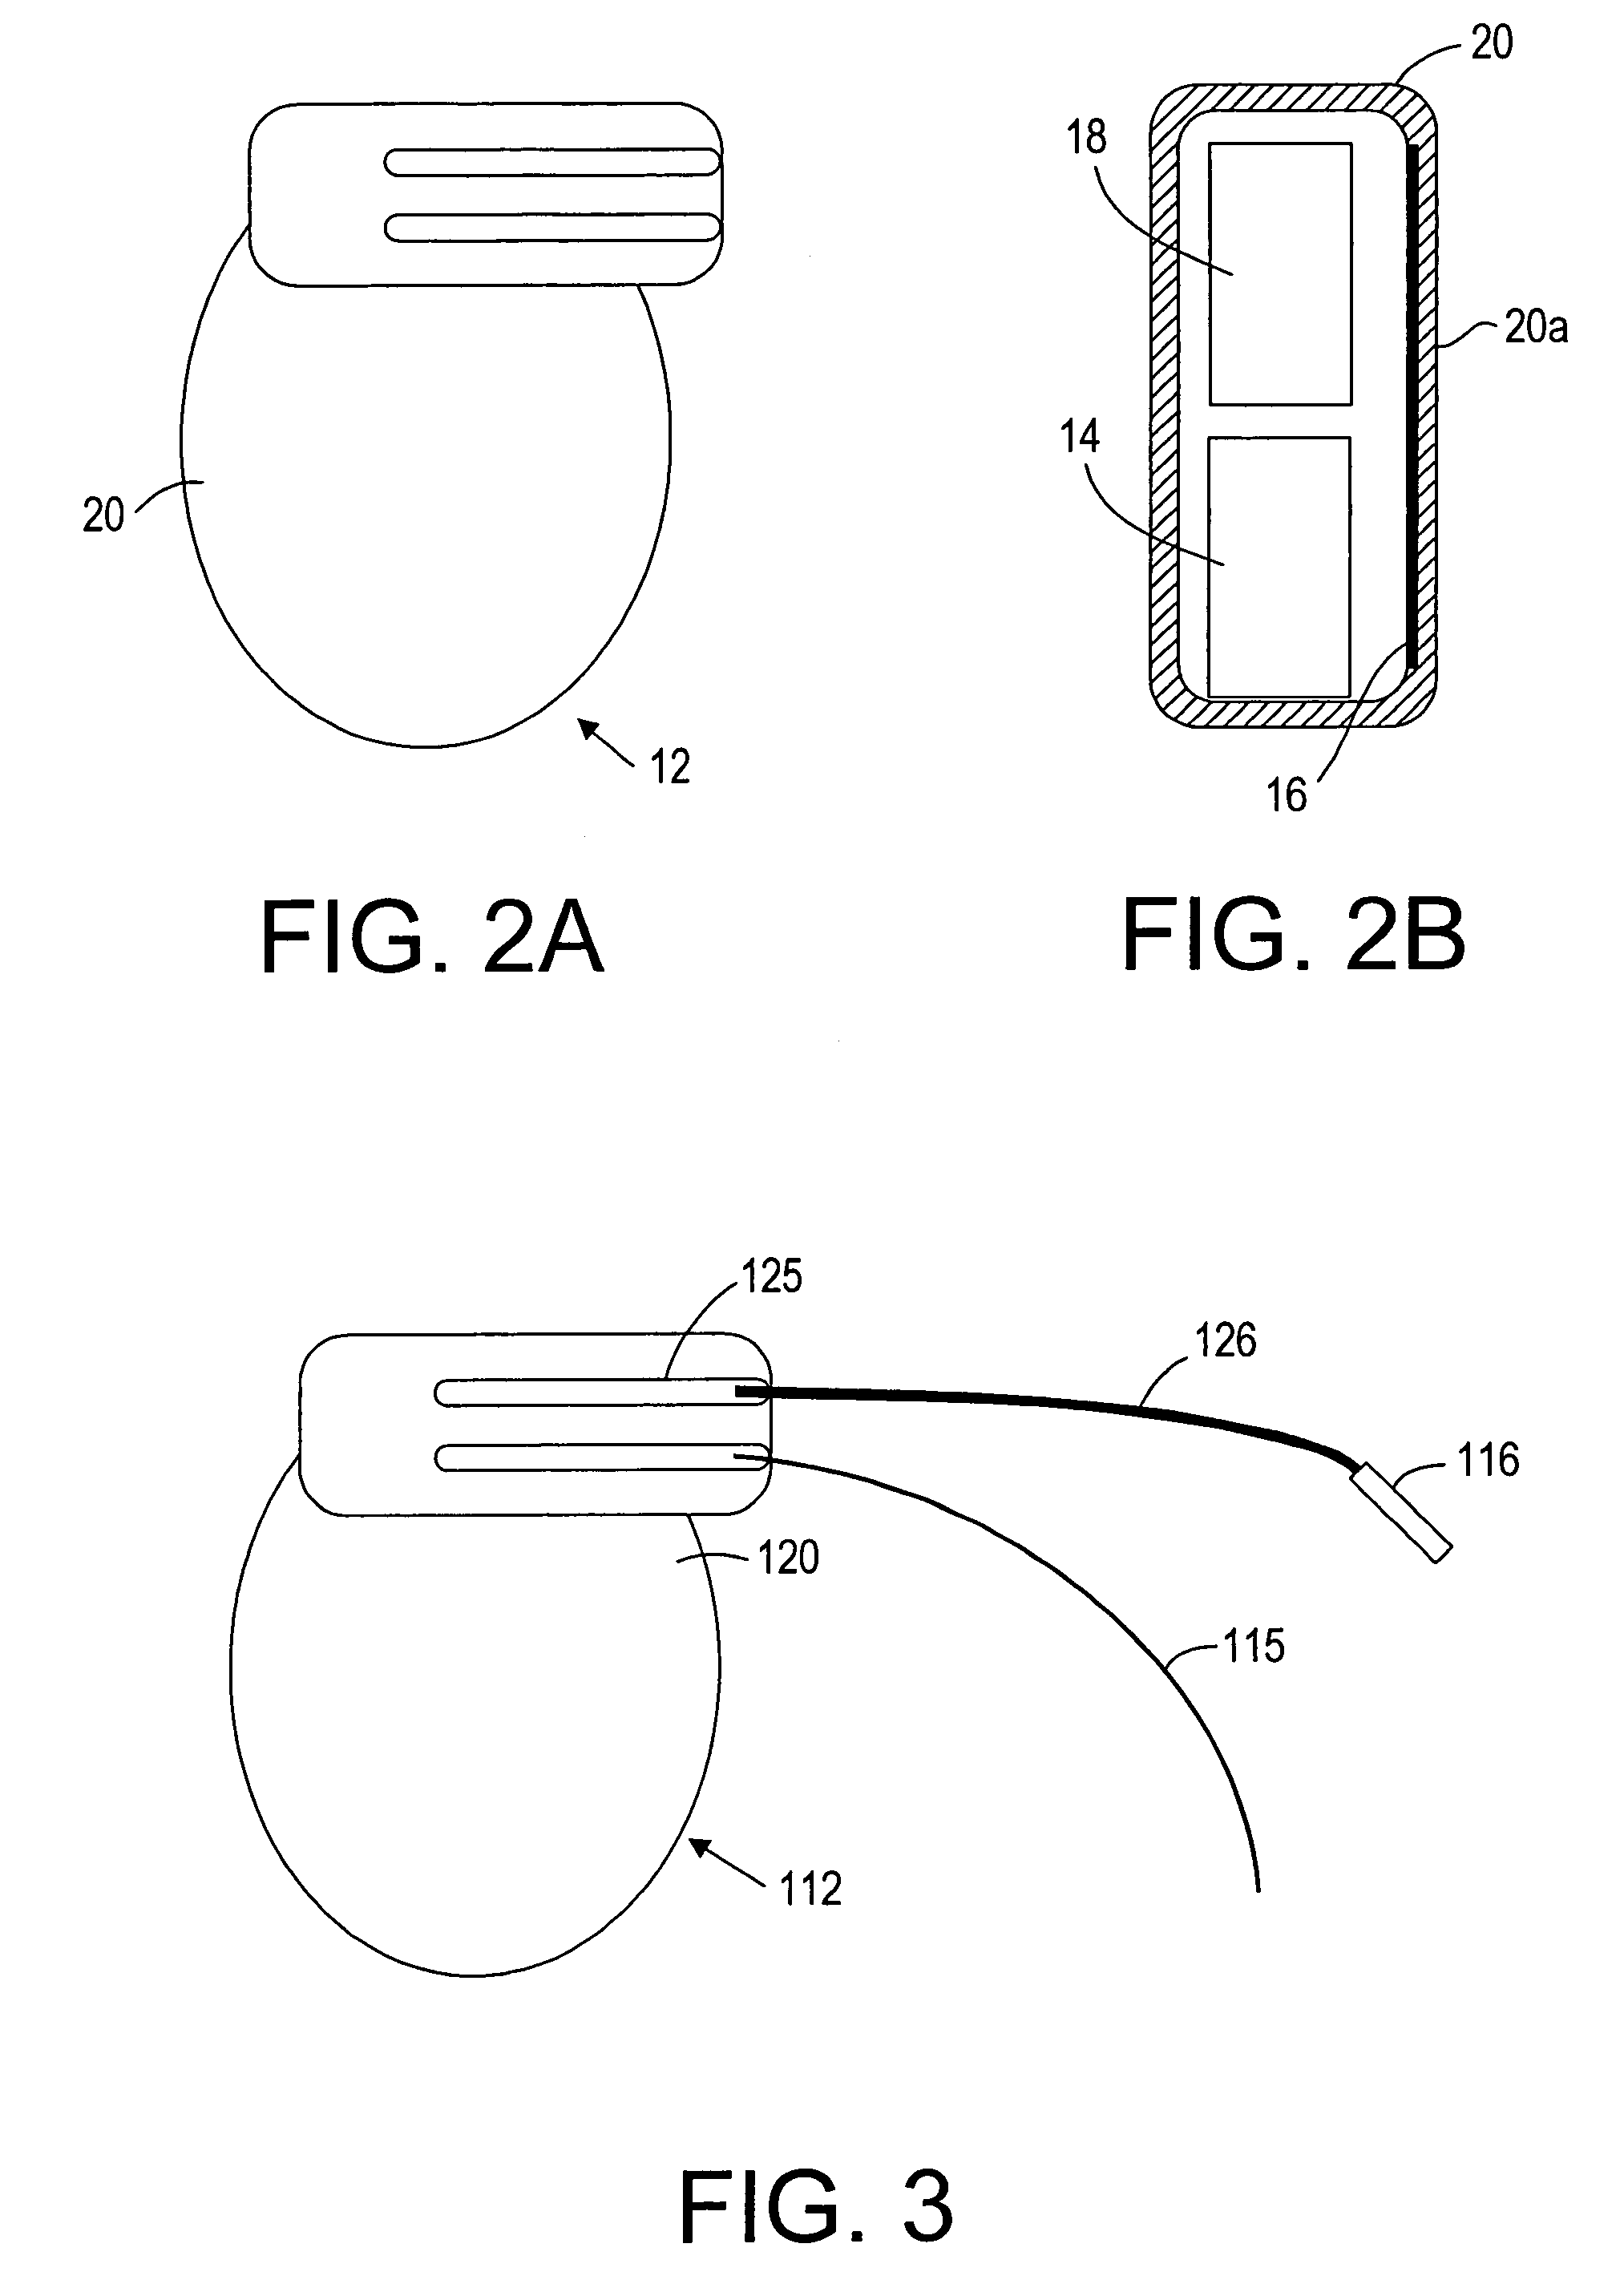 Apparatus and methods using acoustic telemetry for intrabody communications